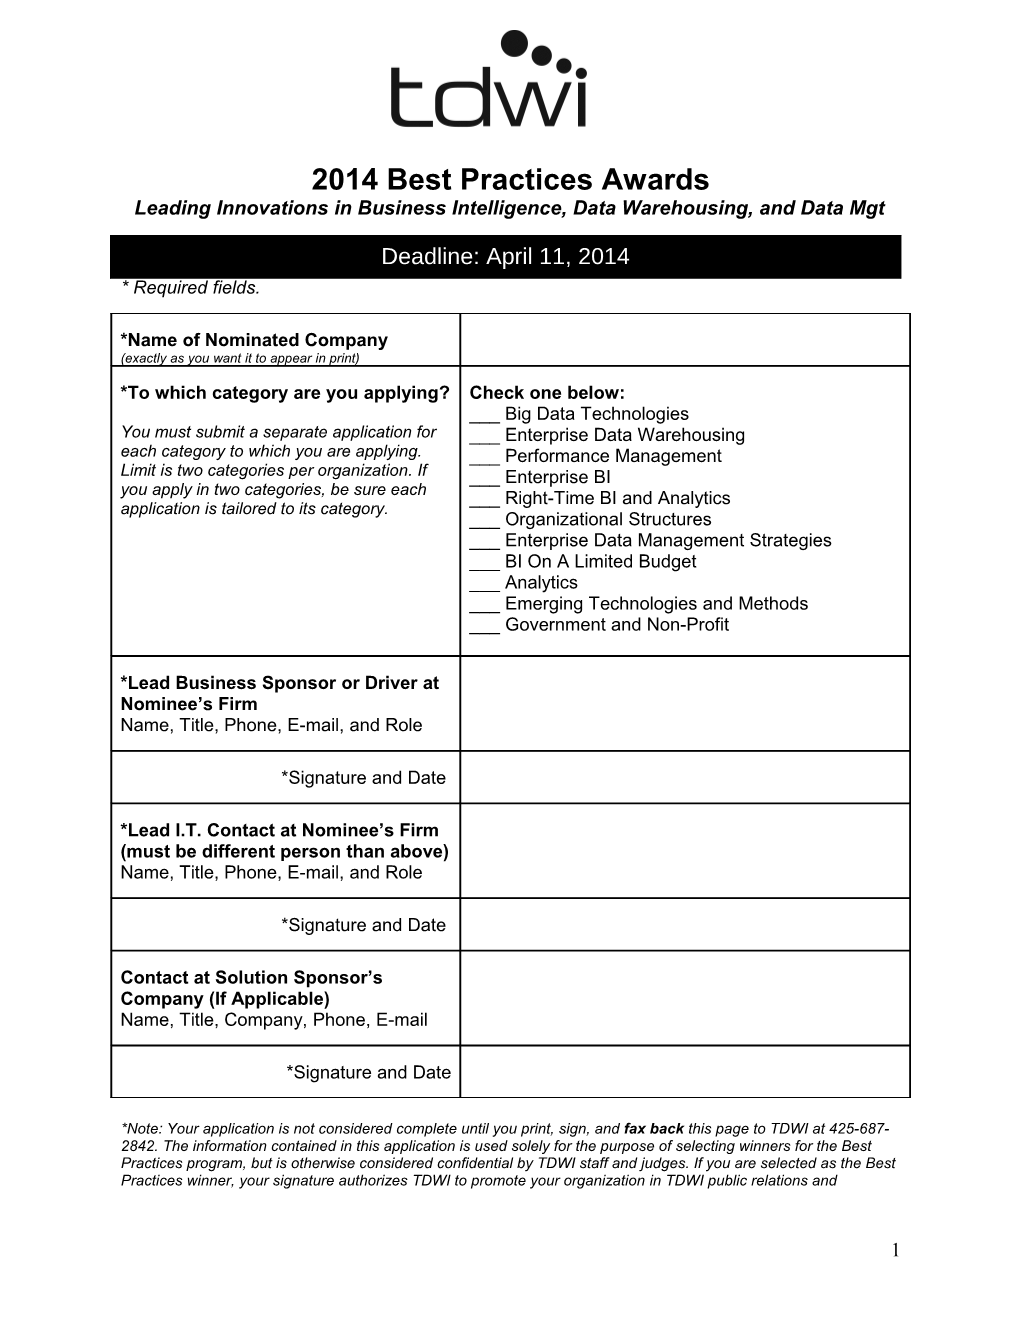 Application Form for 2012 TDWI Best Practices Awards